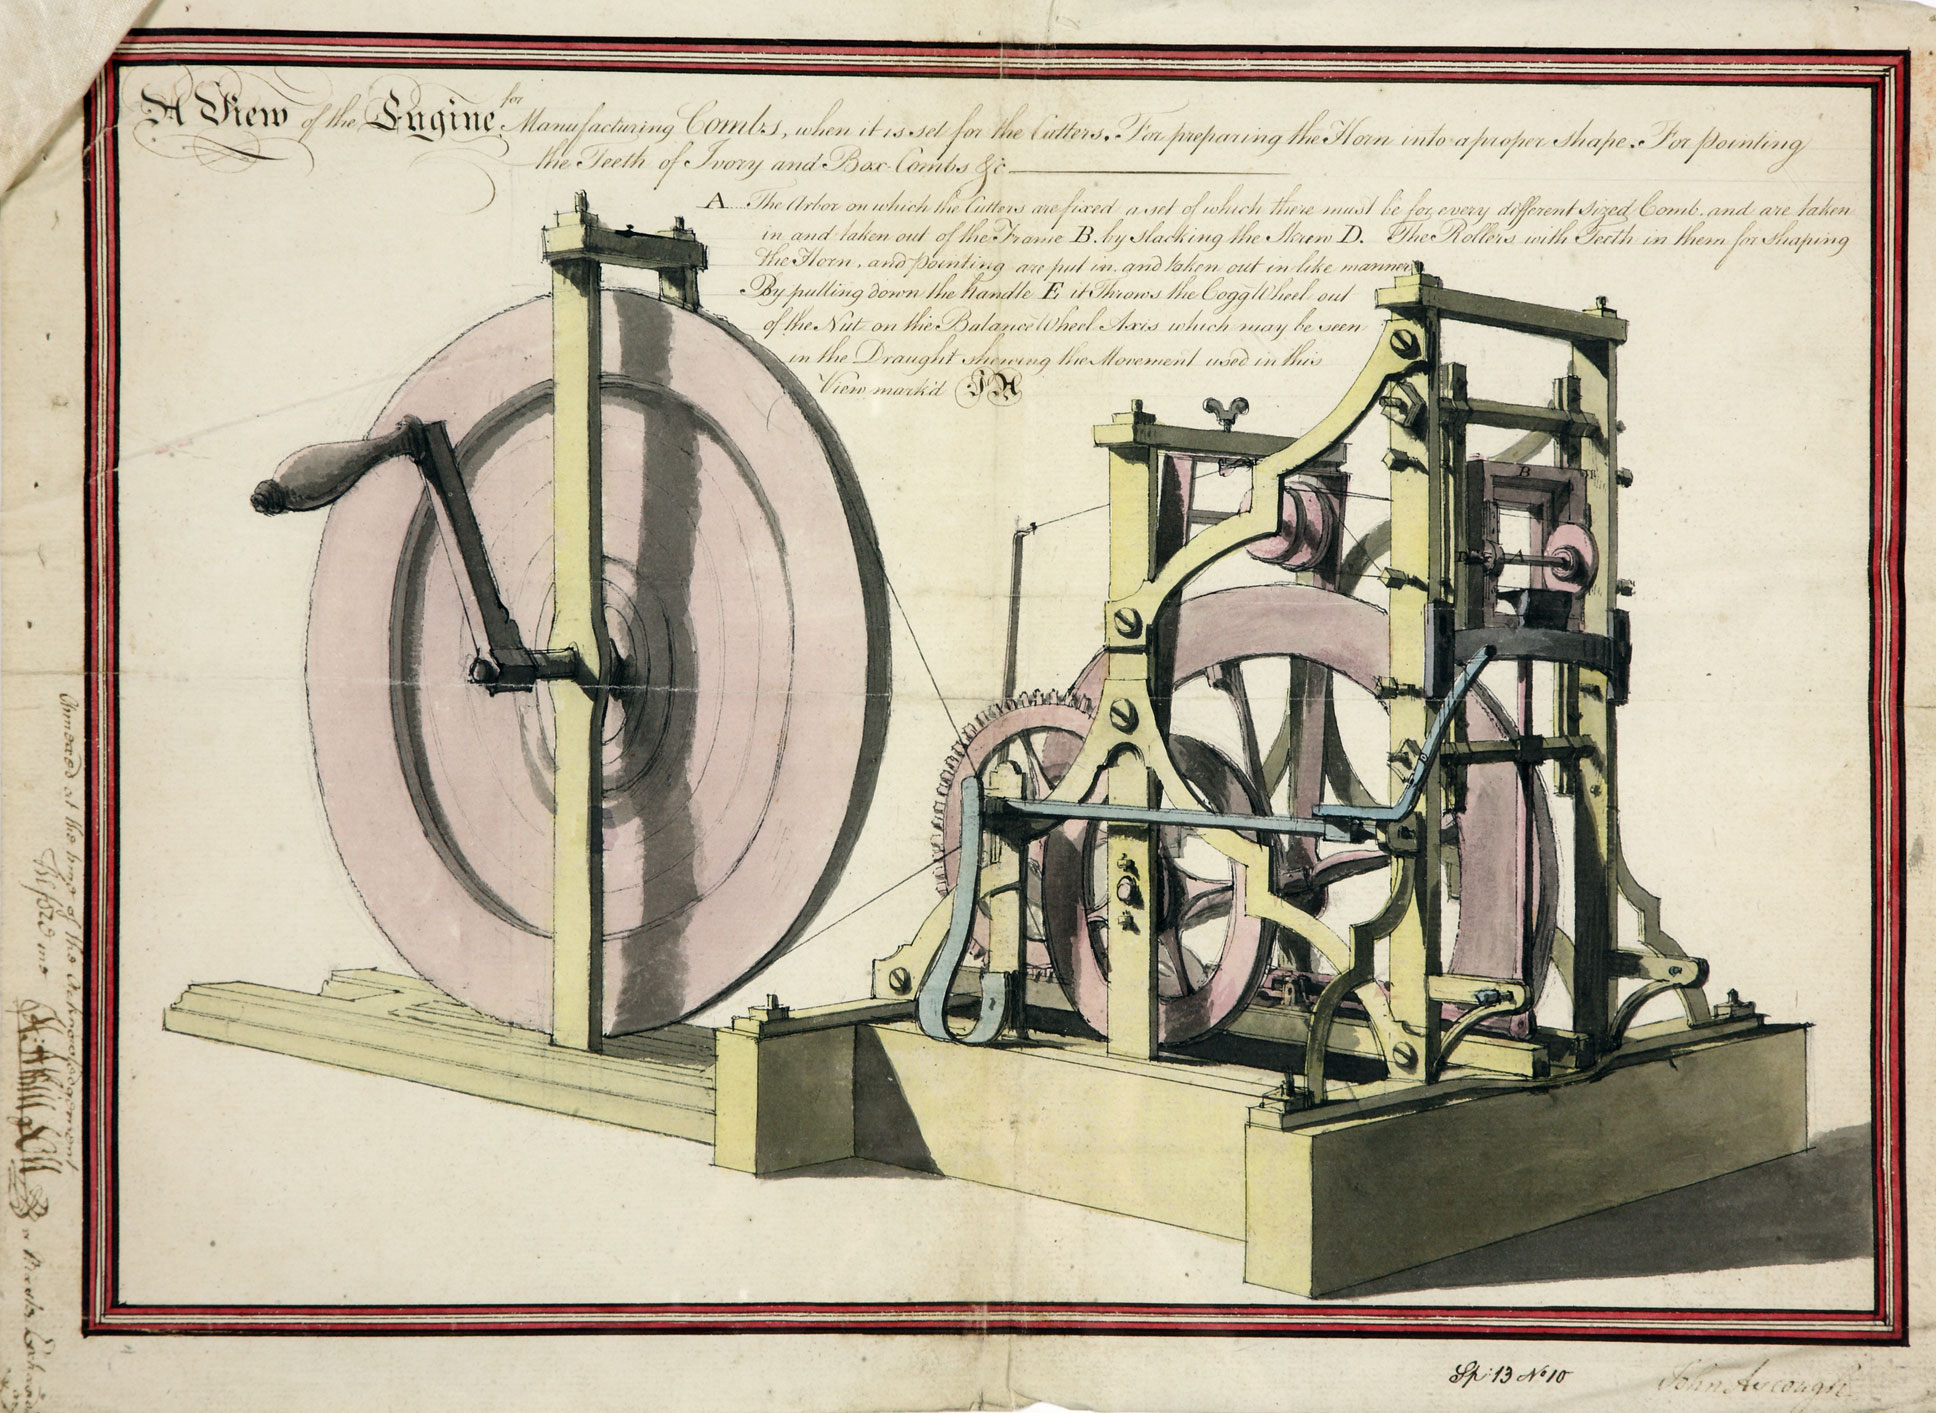 Design illustration of a machine with a big wheel and handle connected to a collection of spokes and machinery within a metal framework.